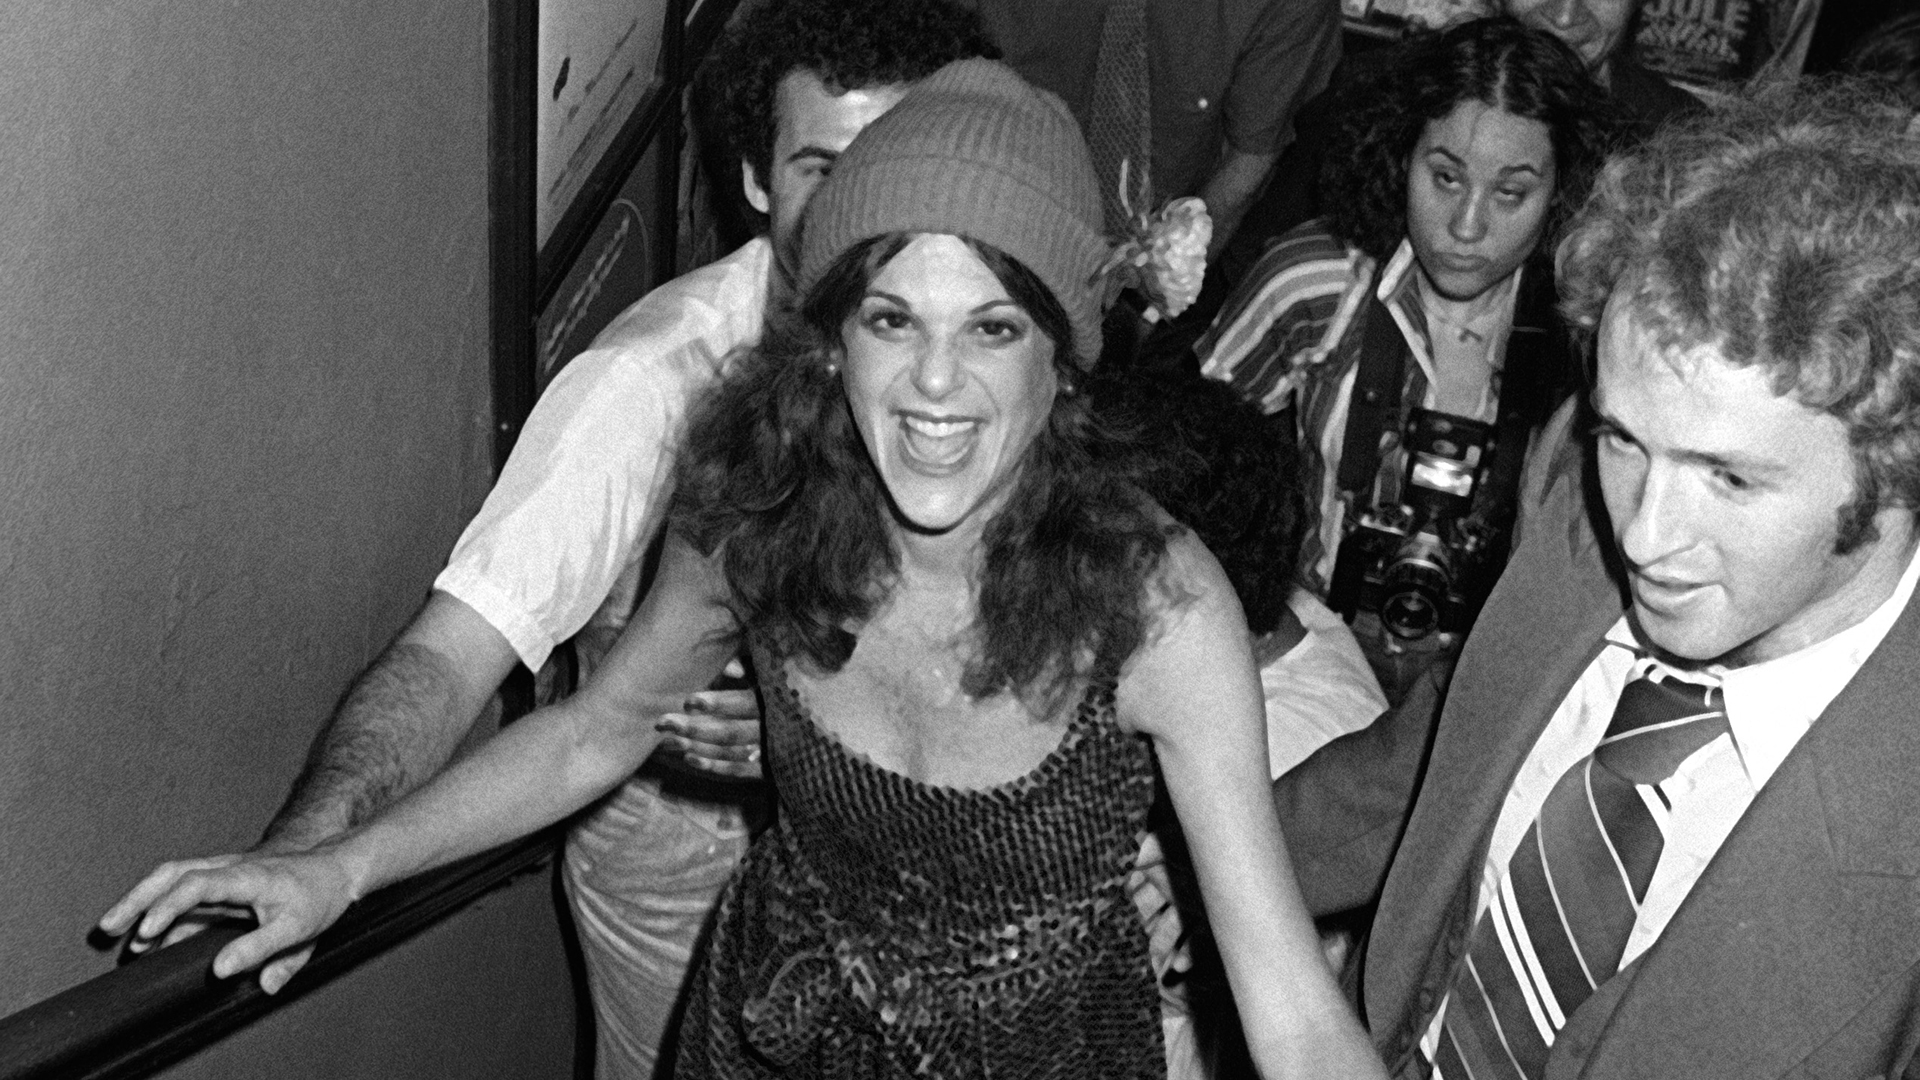 August 2, 1979: Gilda Radner’s One-Woman Show, “Live From New York,” Opened on Broadway